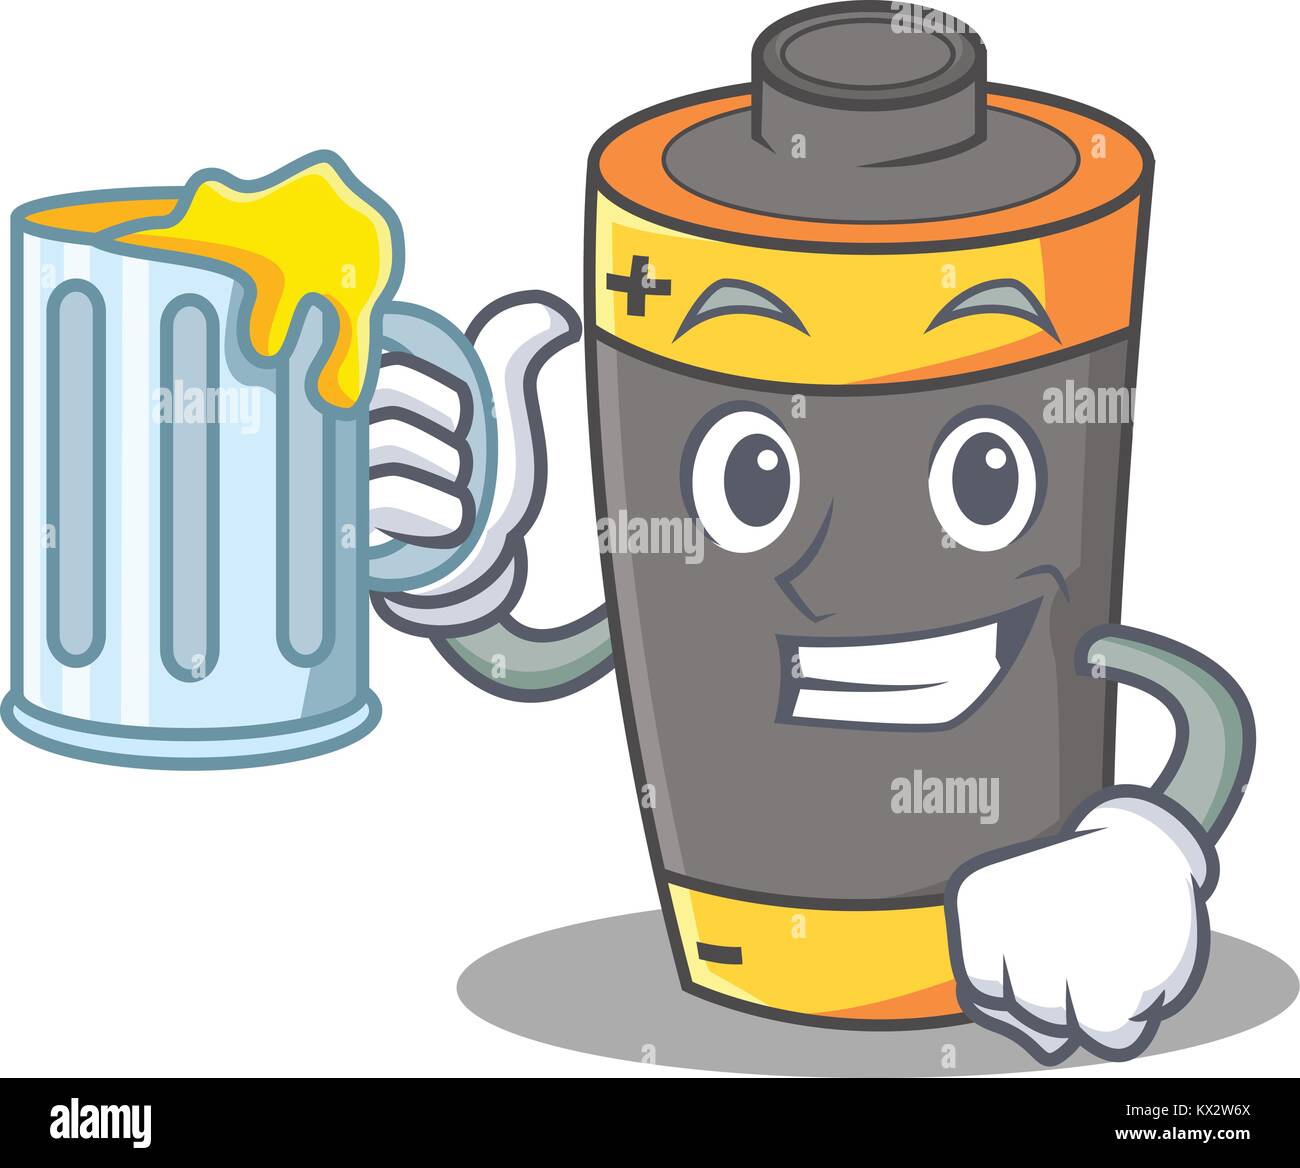 With juice battery mascot cartoon style Stock Vector